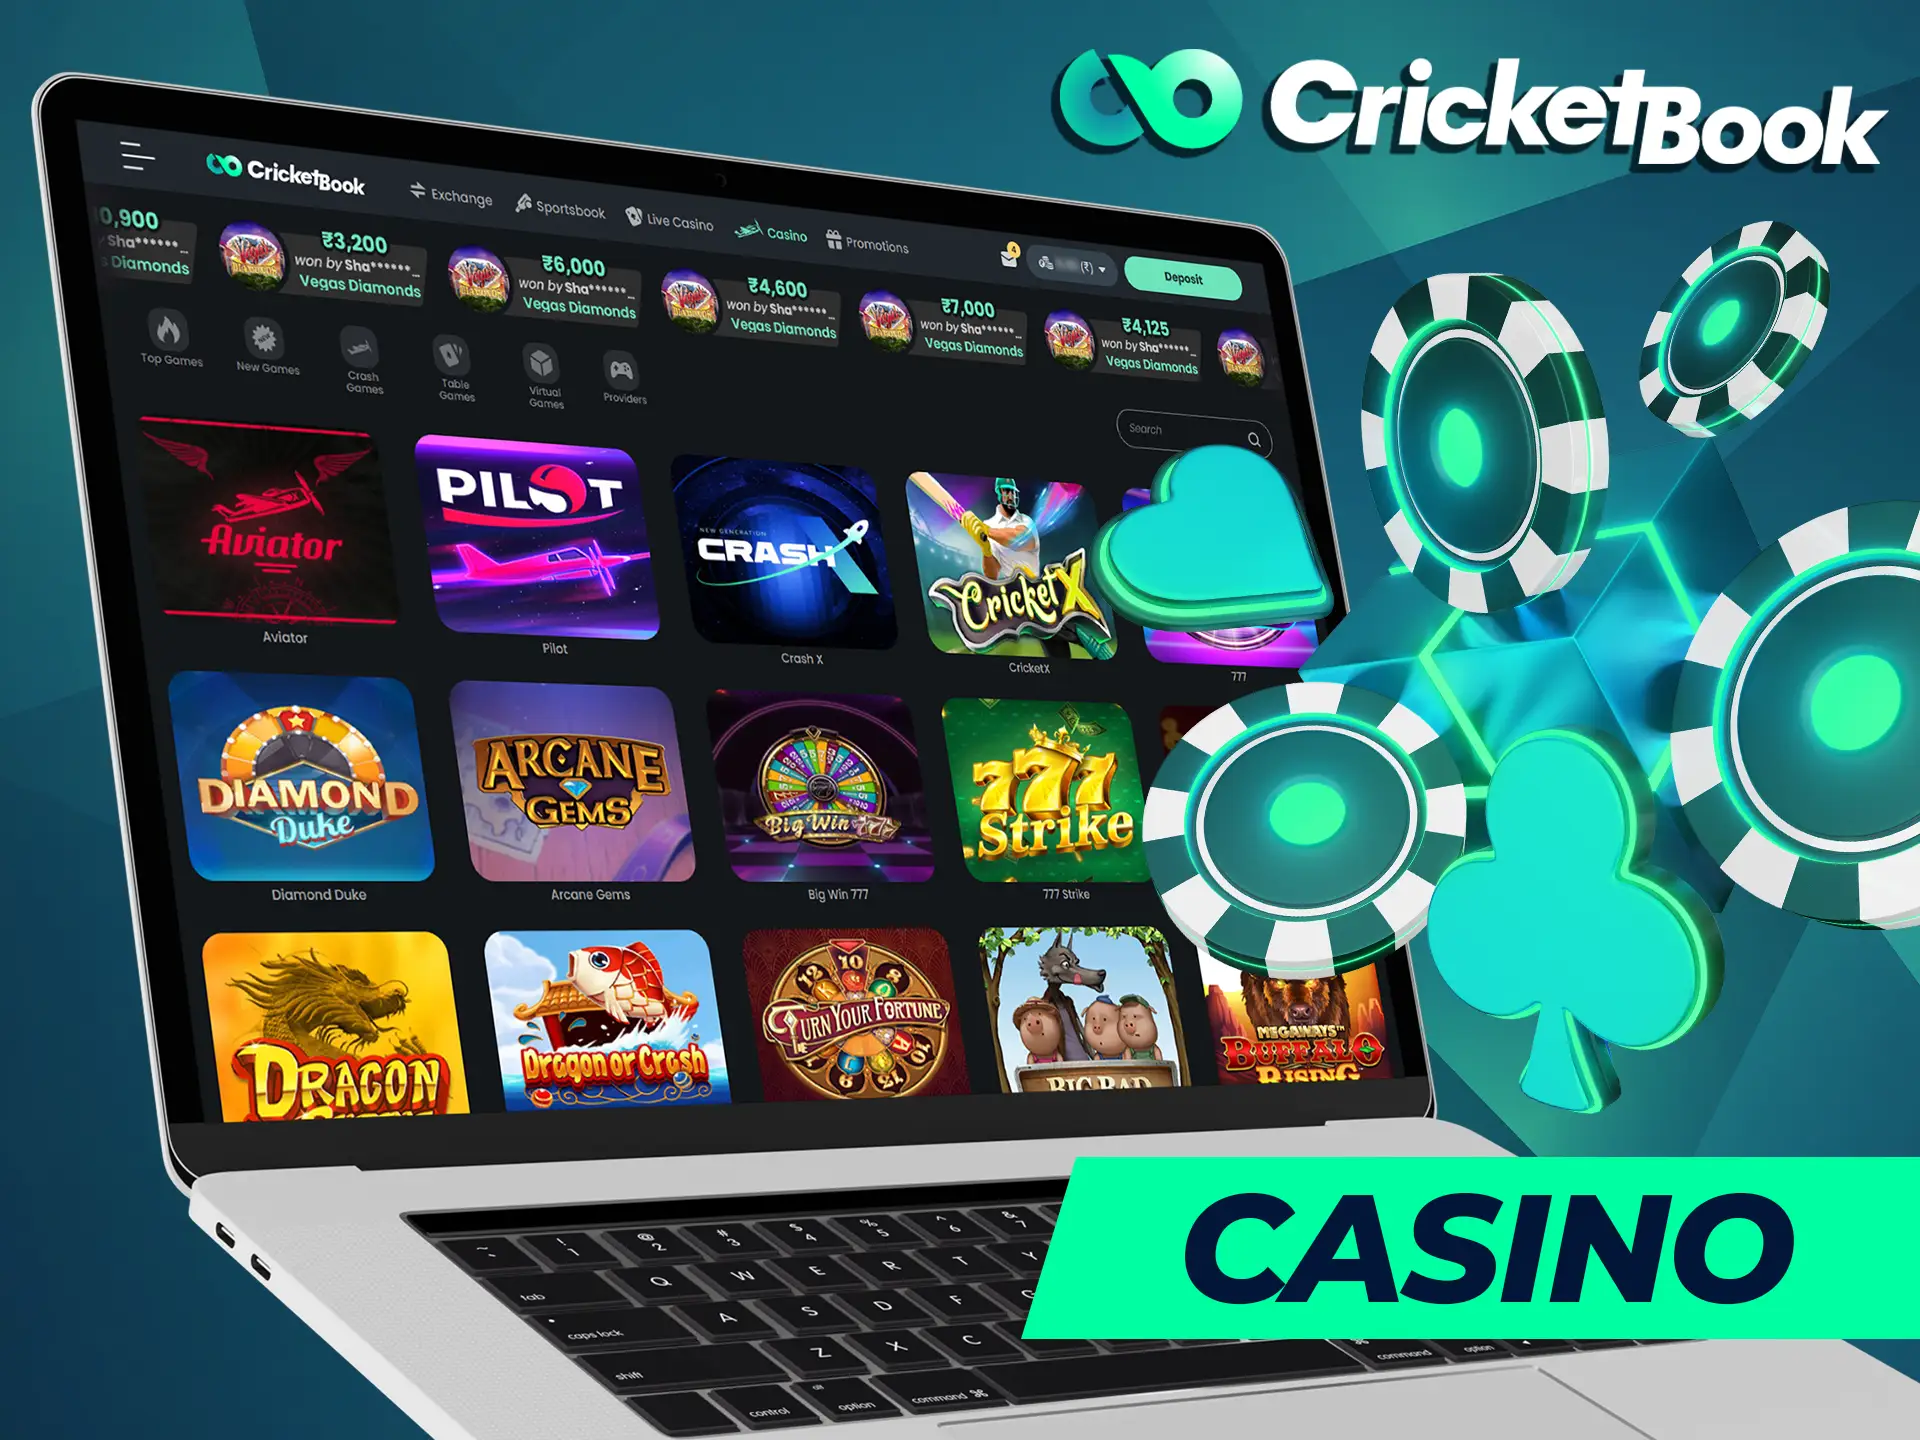 Visit CricketBook Casino to enjoy a variety of gaming choices.